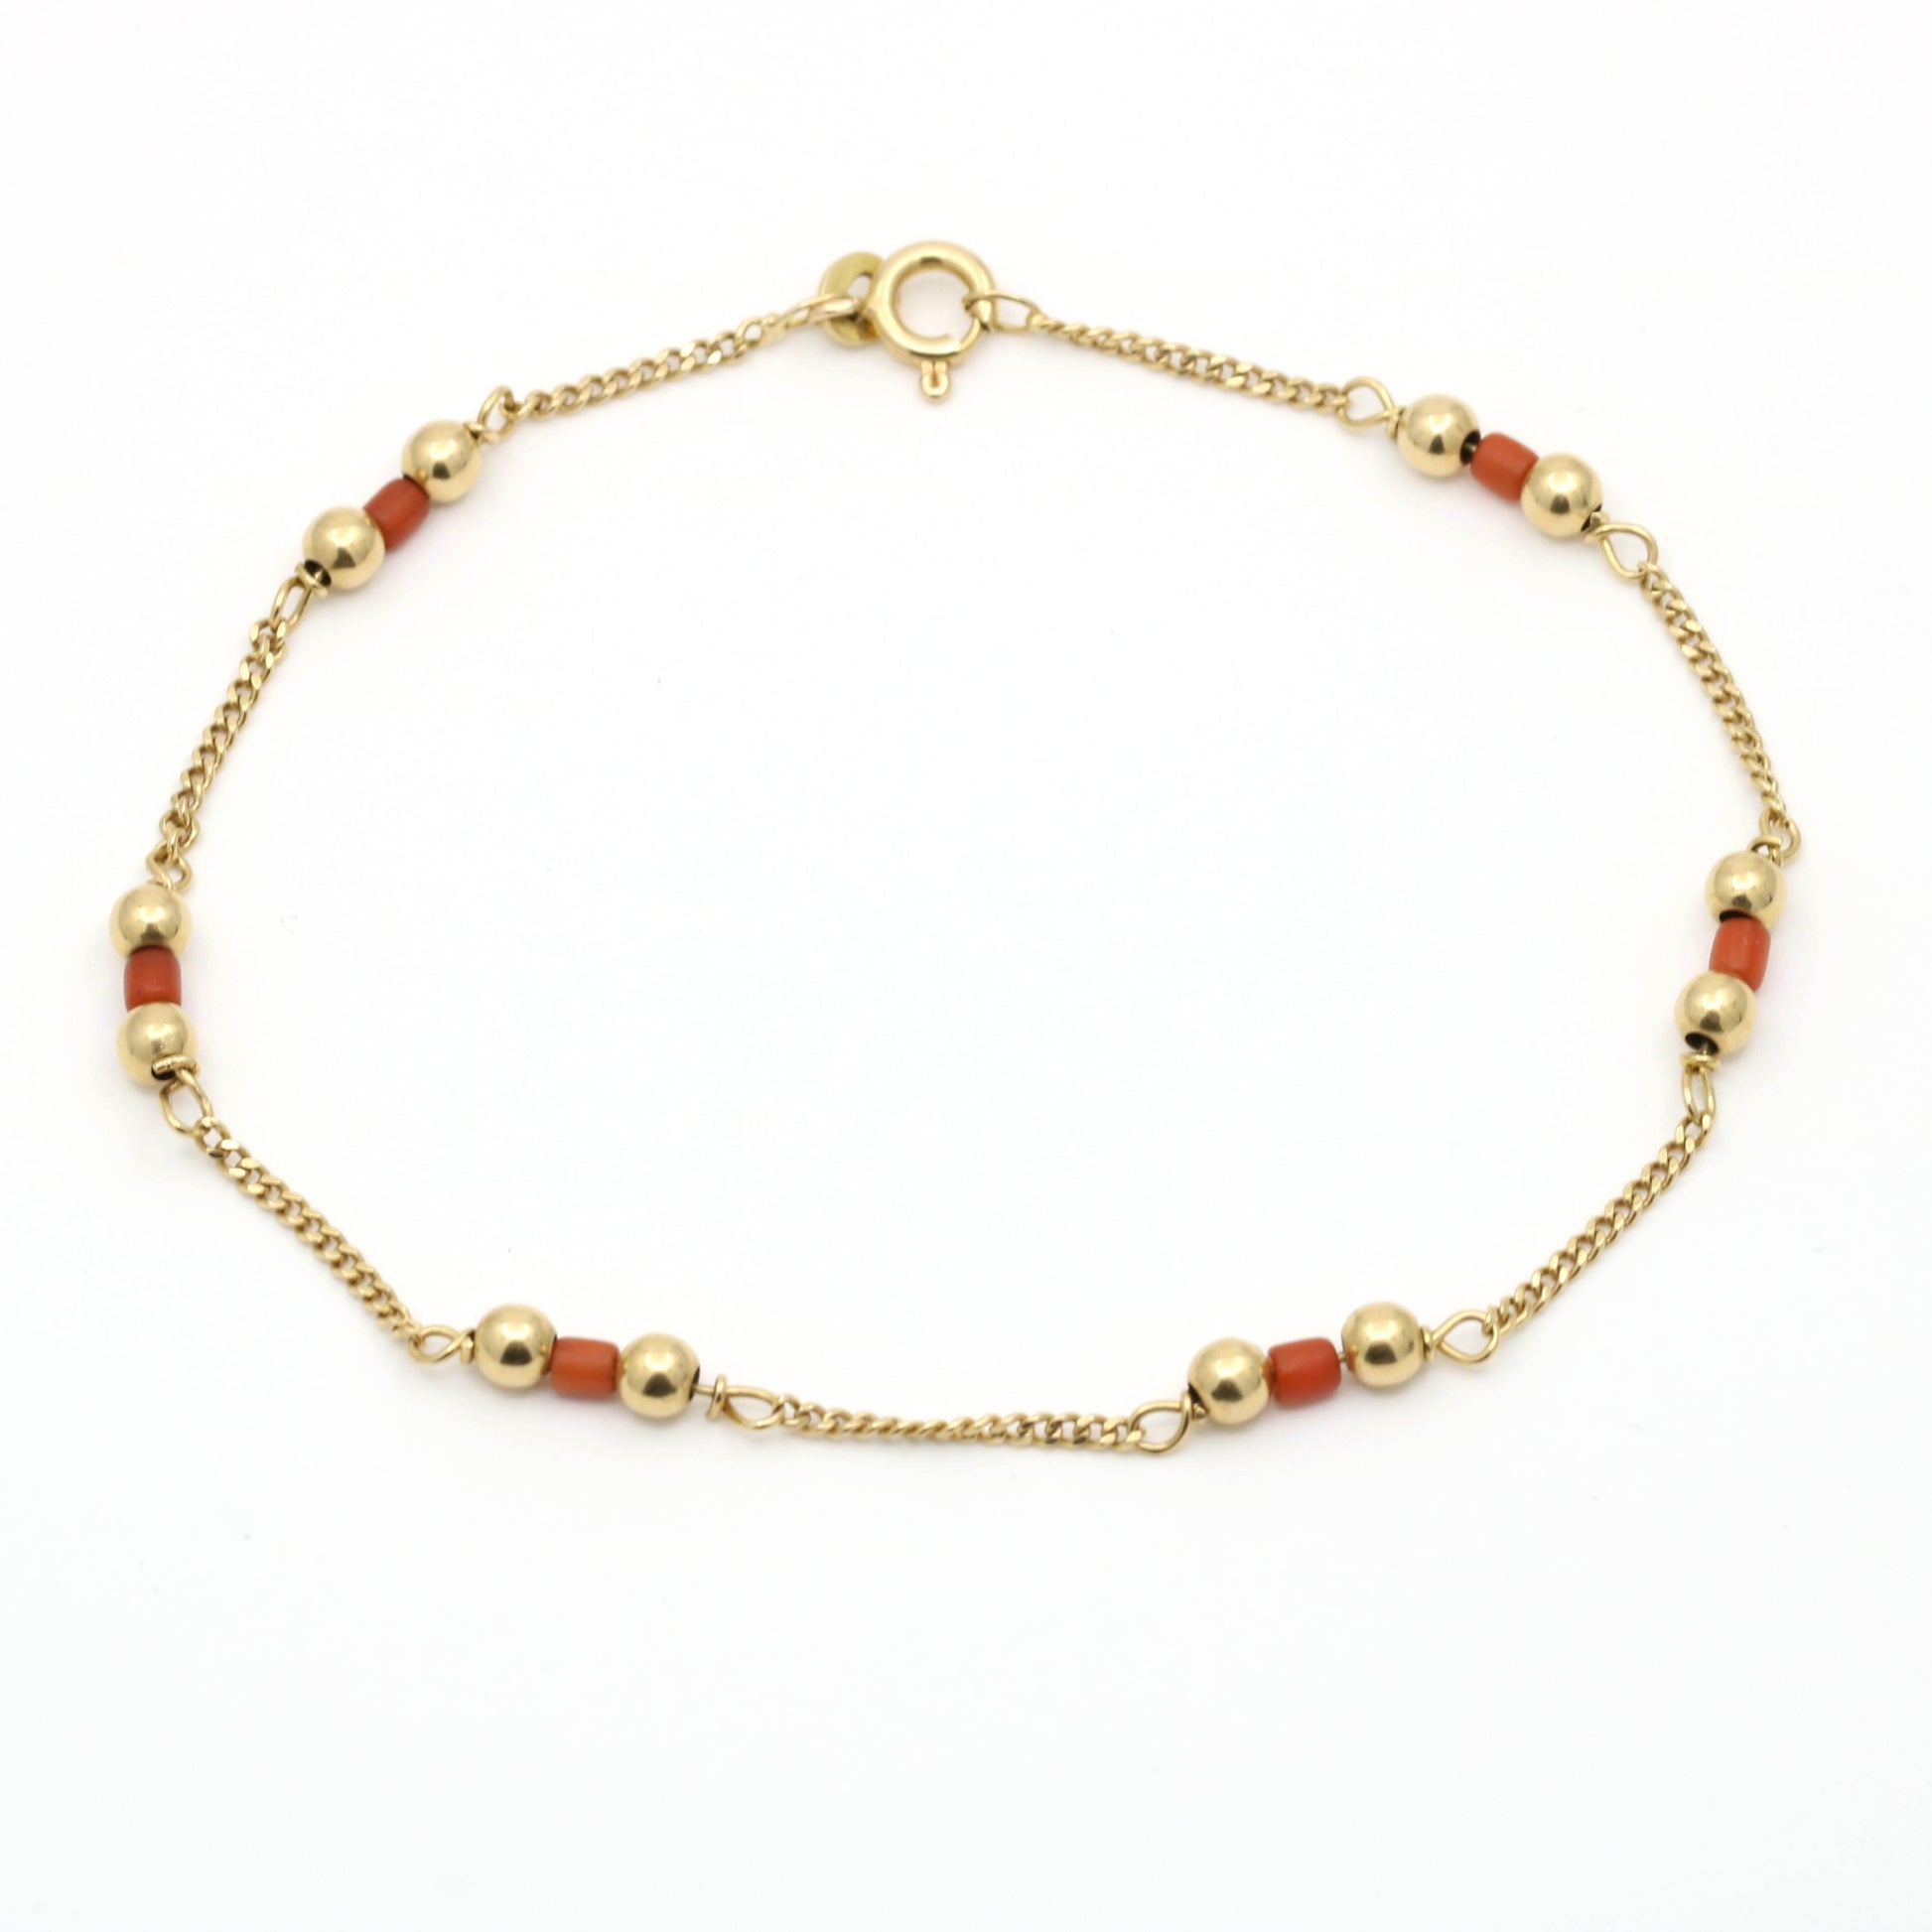 Unoaerre Red Coral Station Bracelet in 18k Yellow Gold - 31 Jewels Inc.